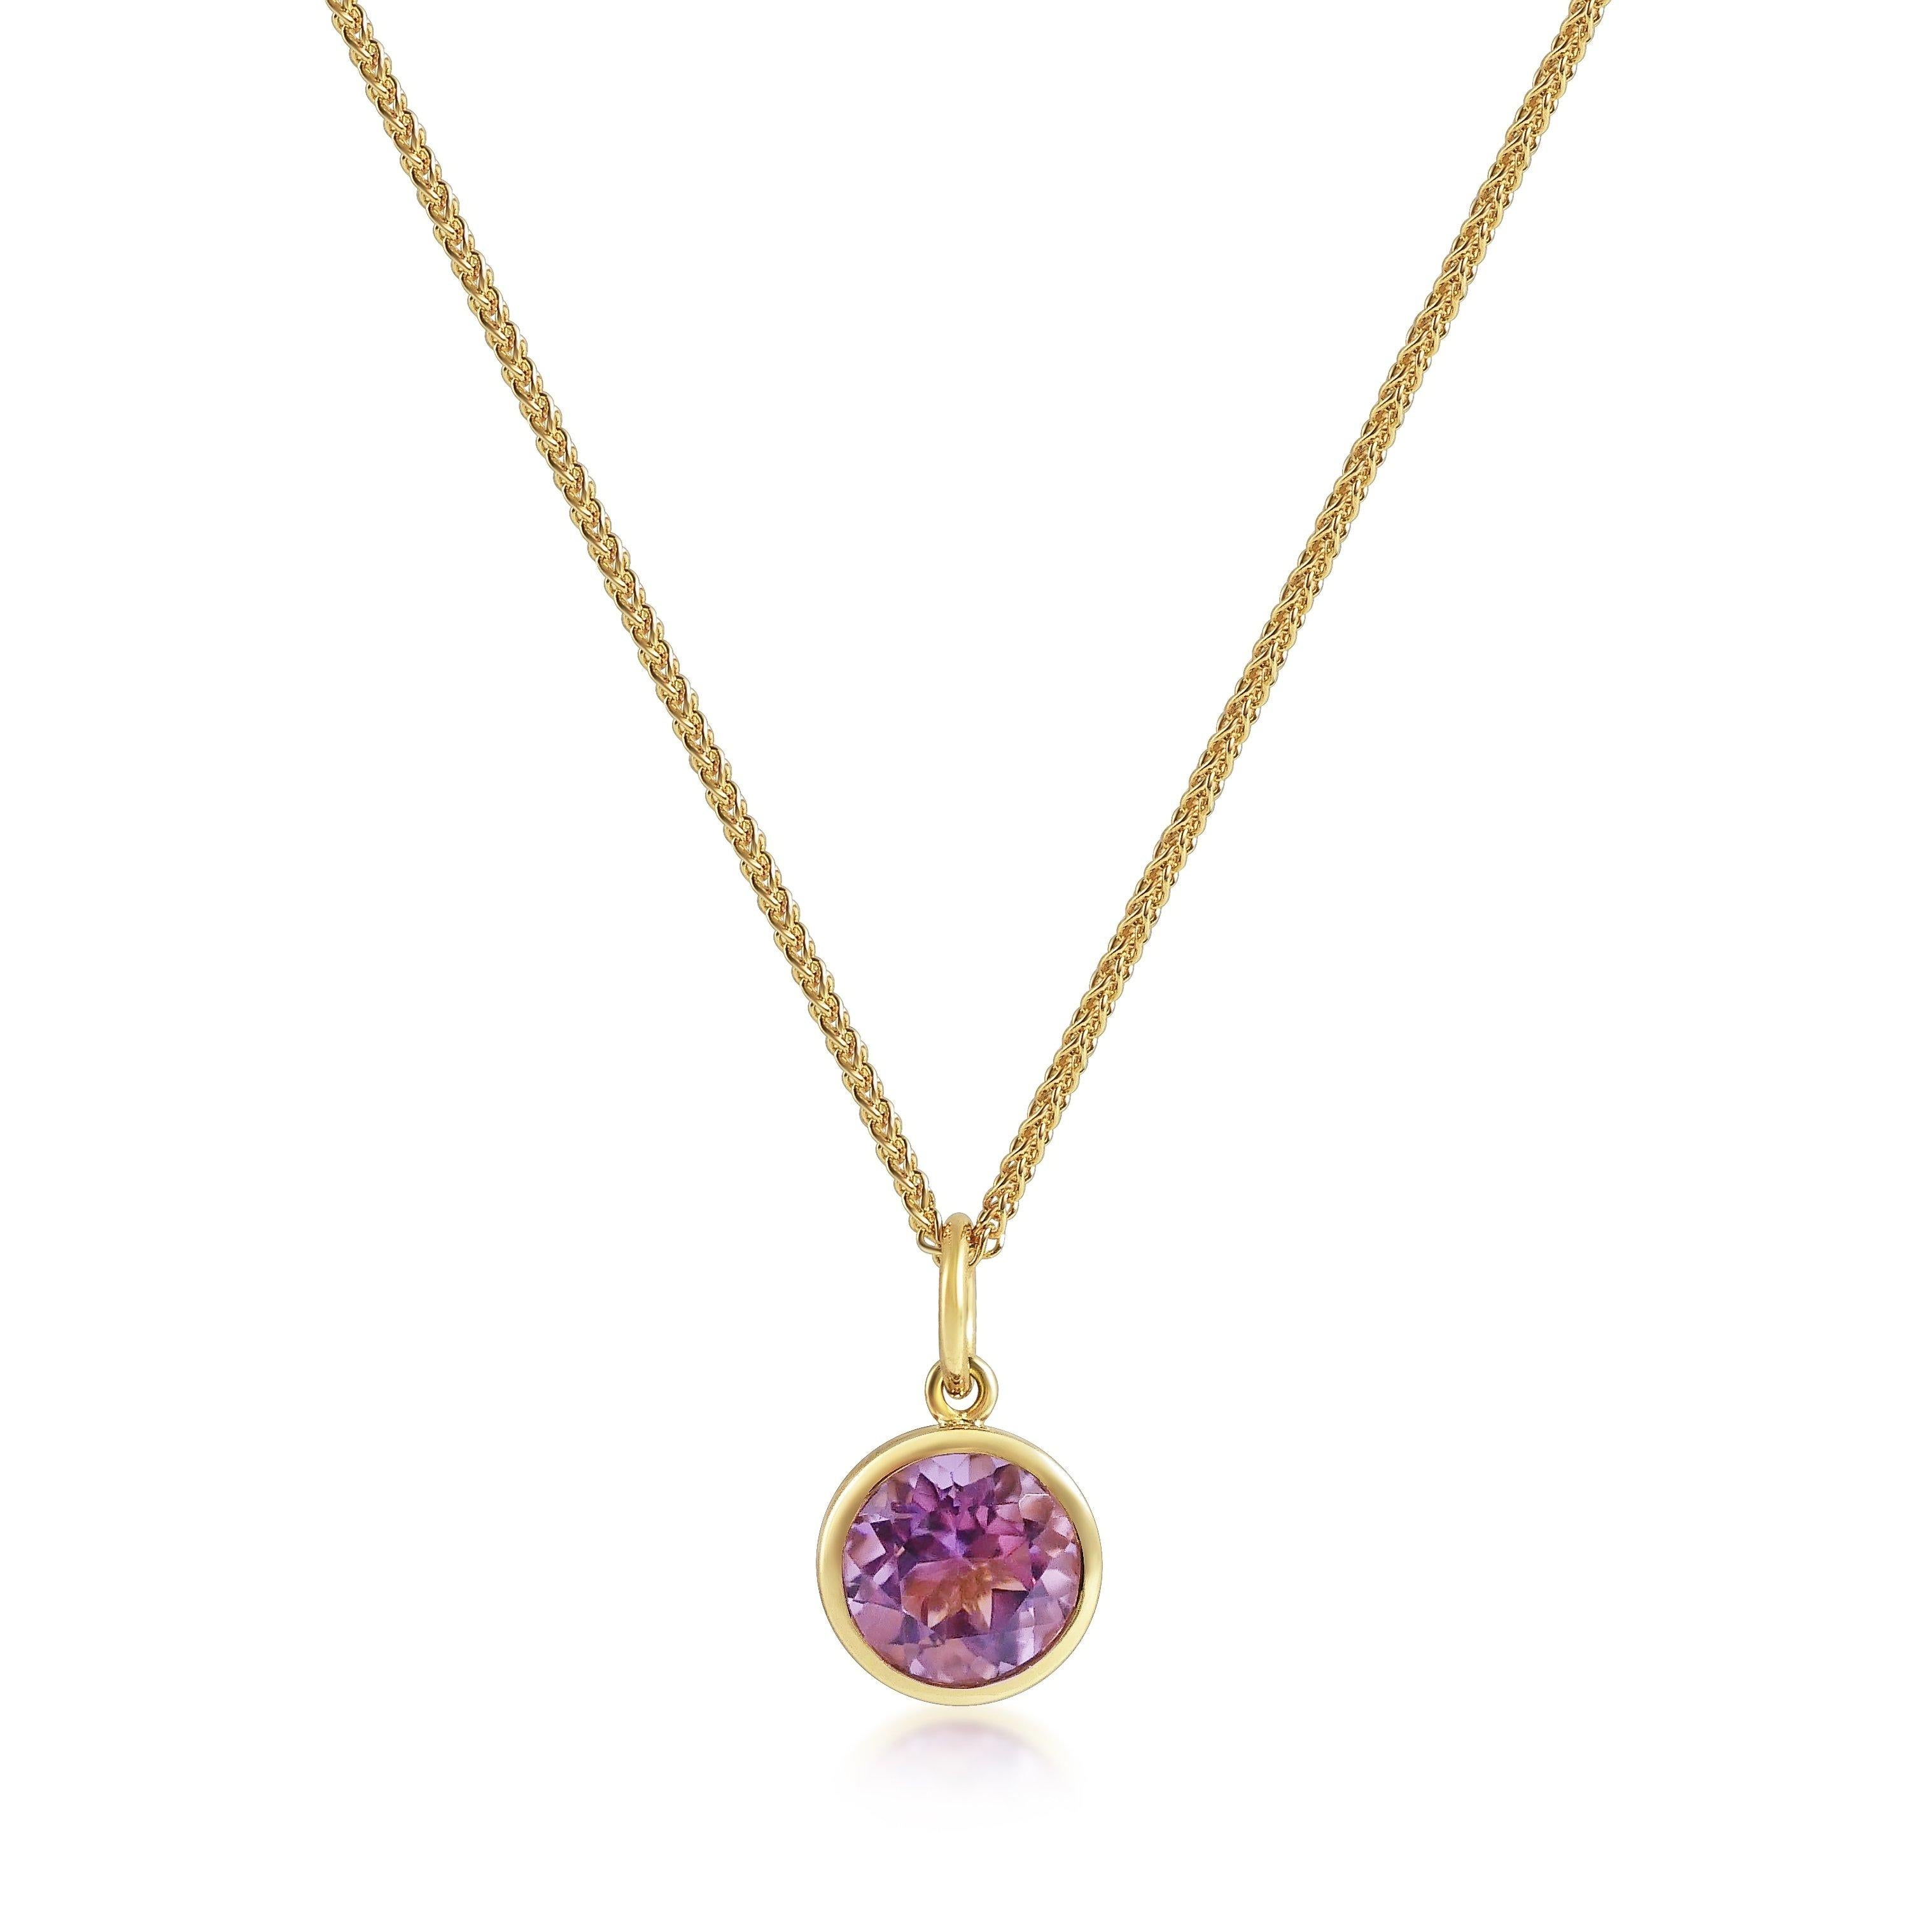 Round Cut Handcrafted 1.20 Carats Amethyst 18 Karat Yellow Gold Pendant Necklace For Sale